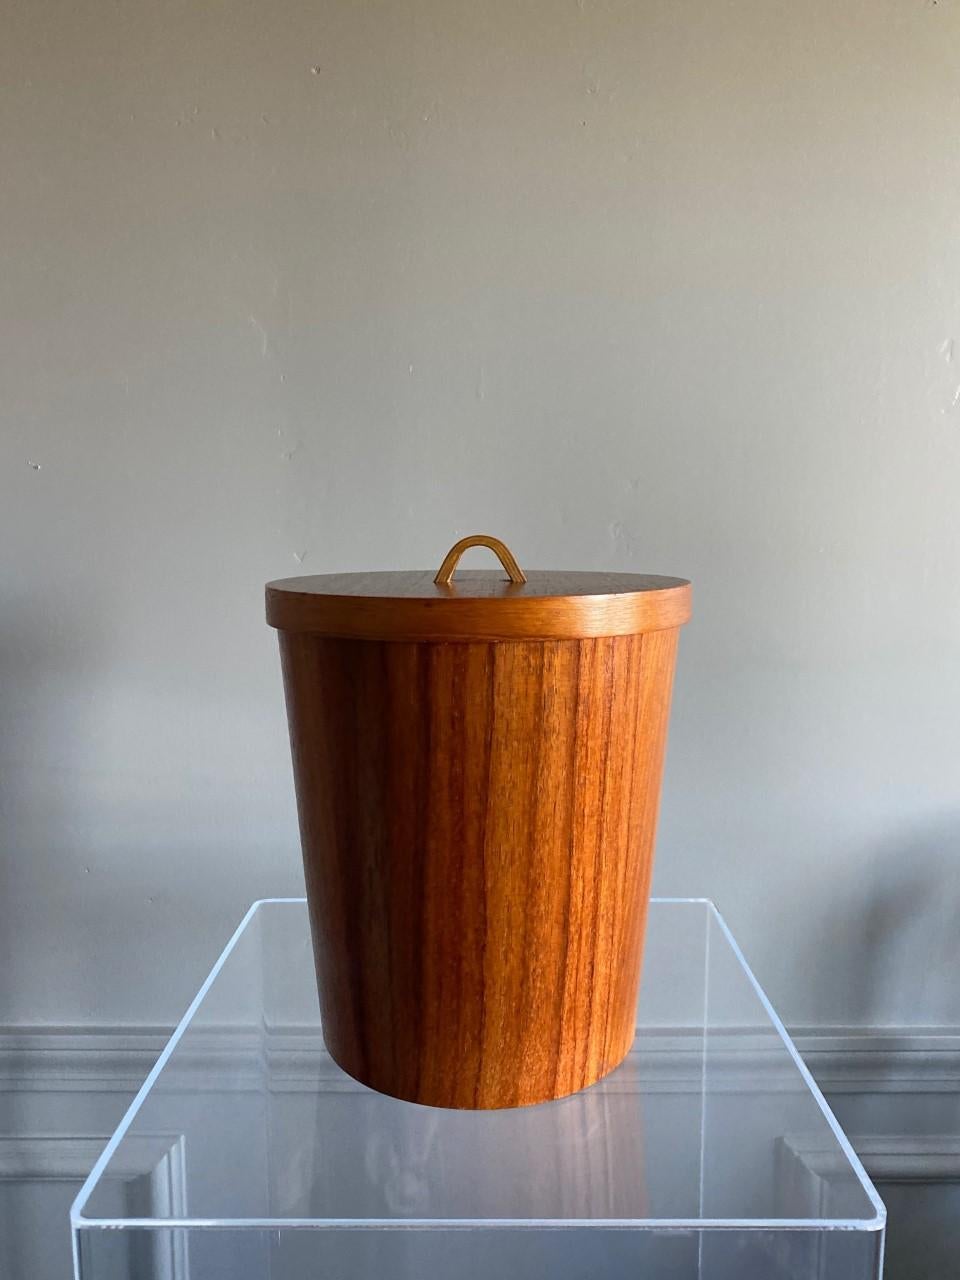 Unique and beautifully crafted Danish midcentury teak ice bucket. This piece has minimal, clean lines while enveloped in the grain of teak with the insert of aluminum. The piece comes with original set of ice tongs. Linear in shape but rich in style.